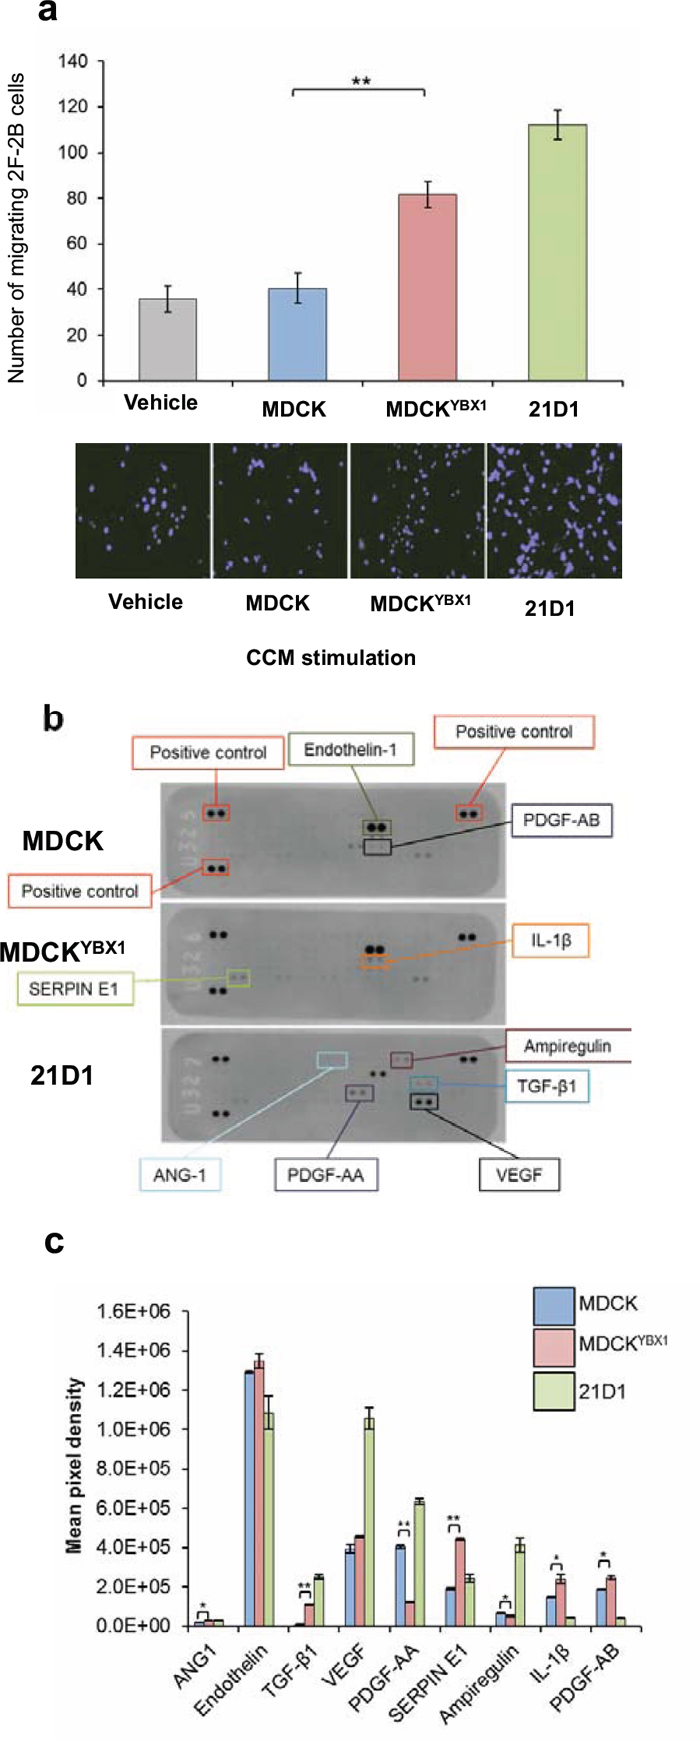 MDCKYBX1 cells secrete angiogenic factors which increase endothelial cell migration.